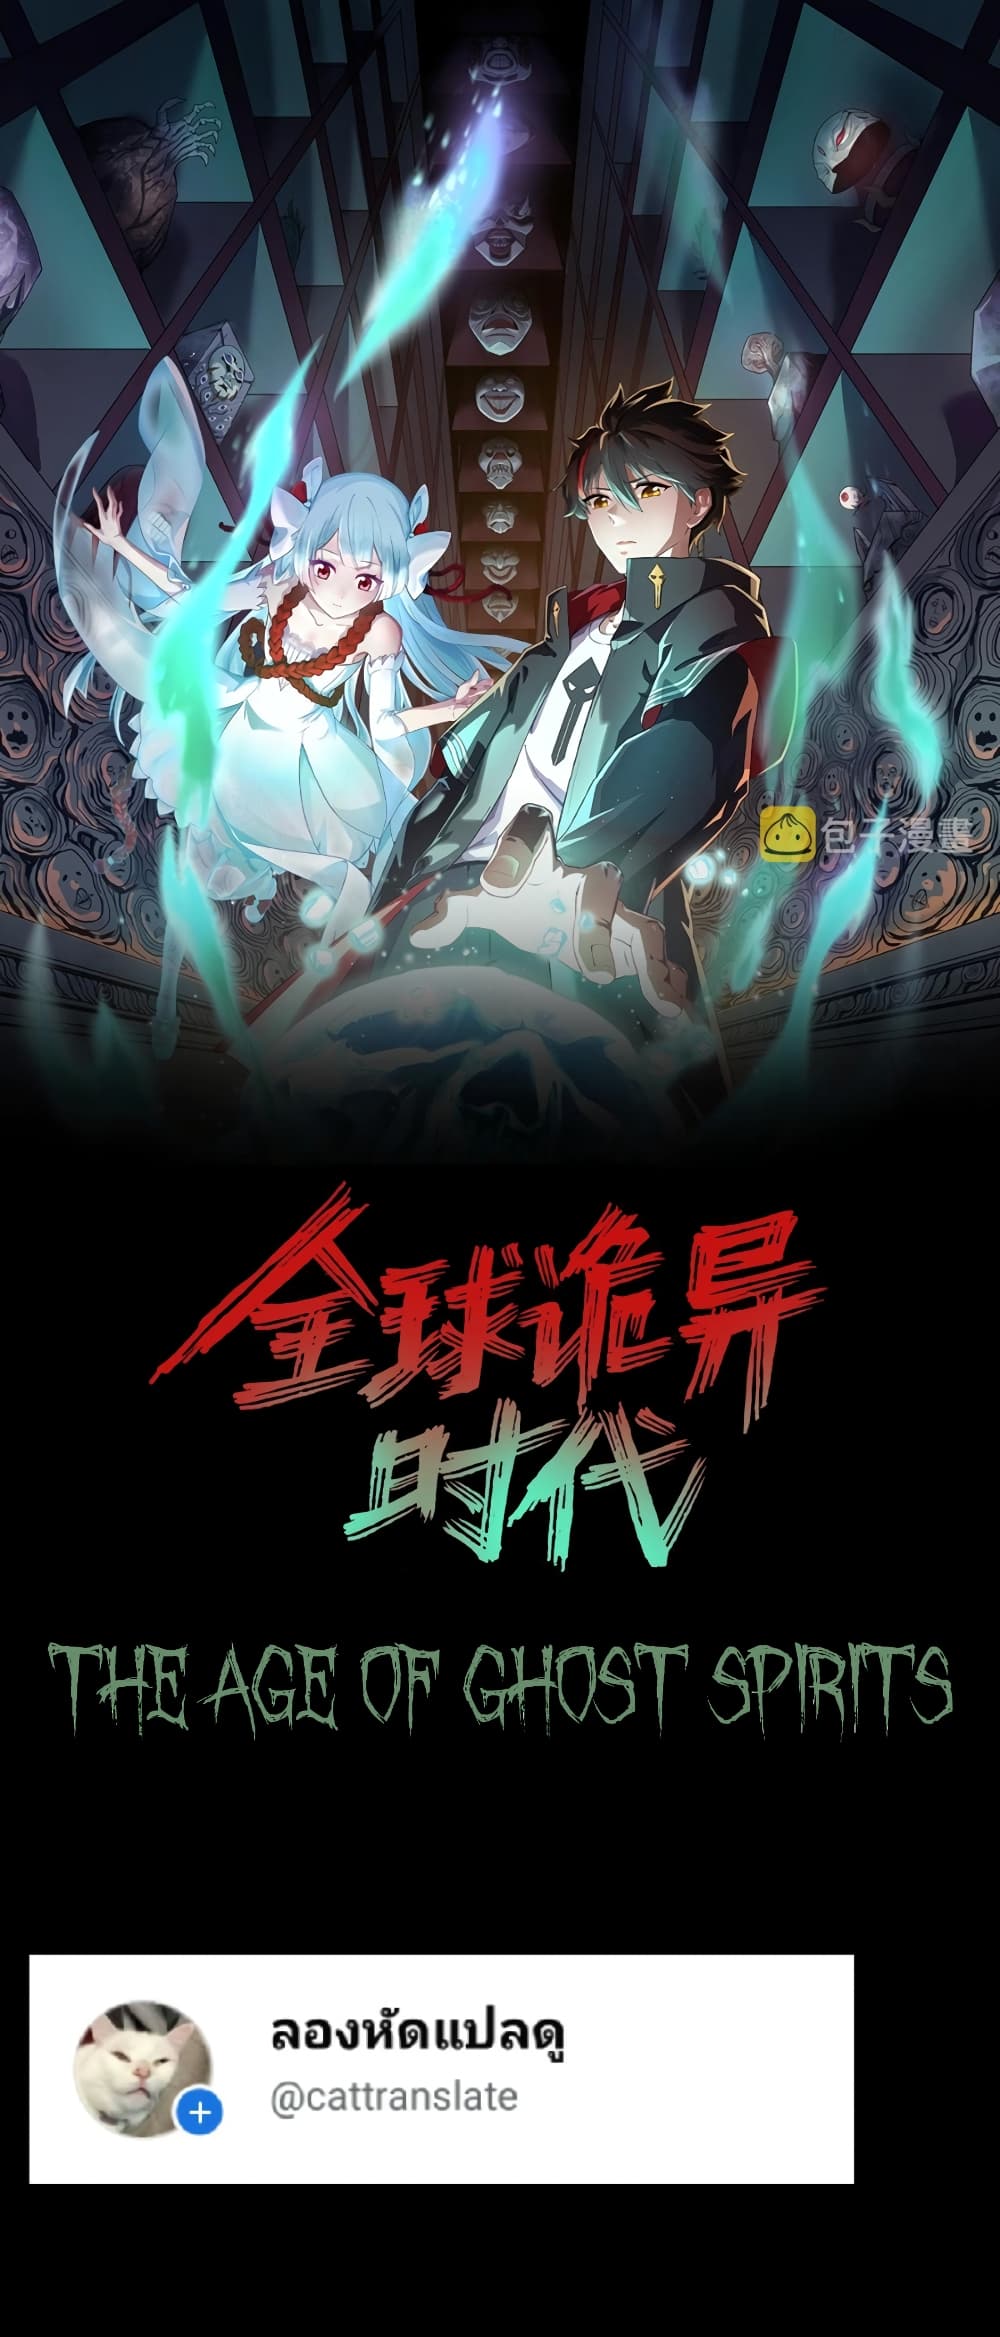 The Age of Ghost Spirits à¸à¸­à¸à¸à¸µà¹ 25 (1)